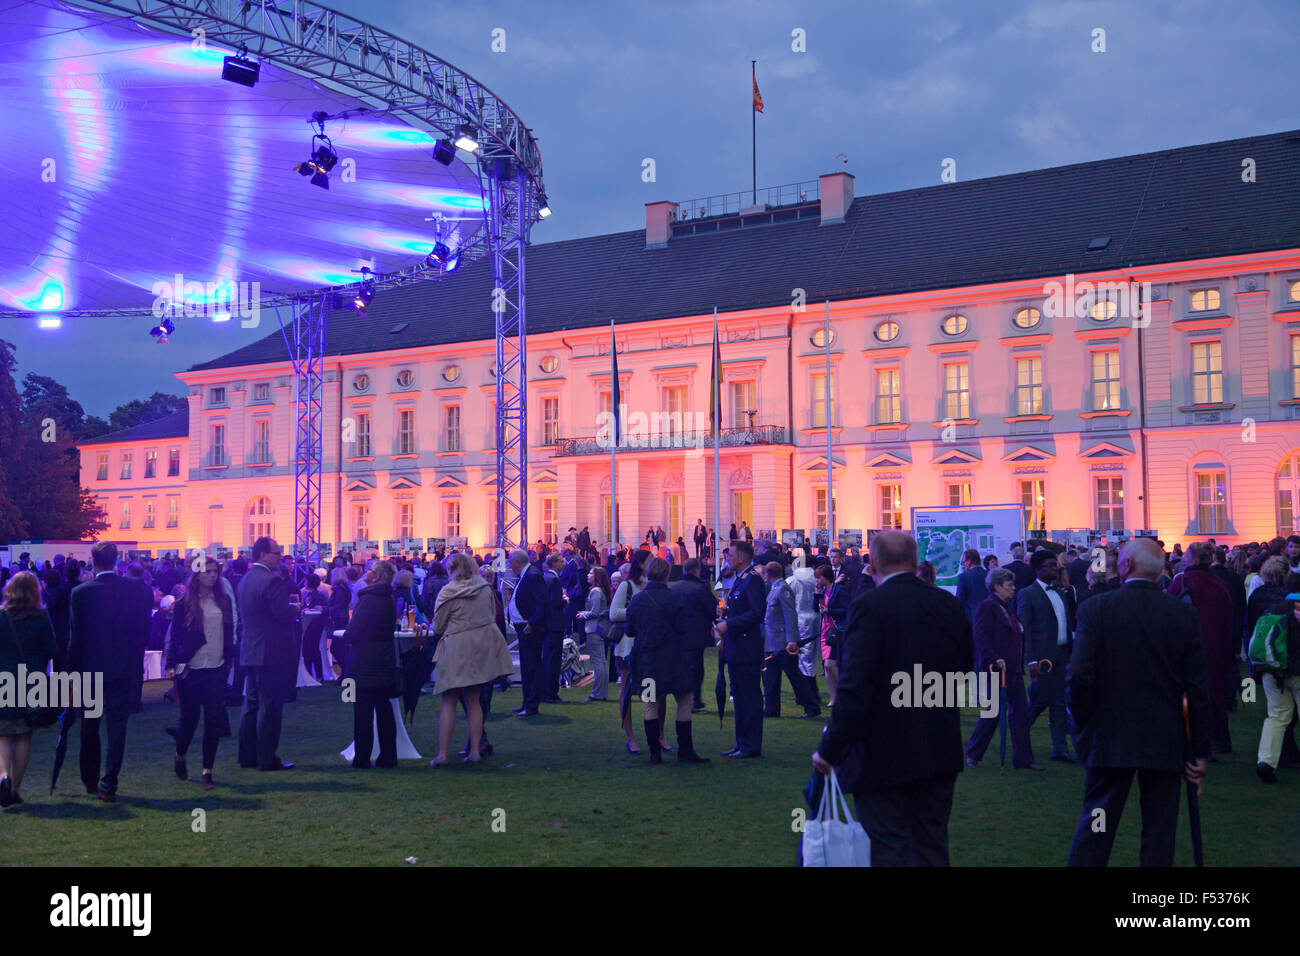 annual Citizens' Fest at Bellevue Palace, Berlin, Germany Stock Photo